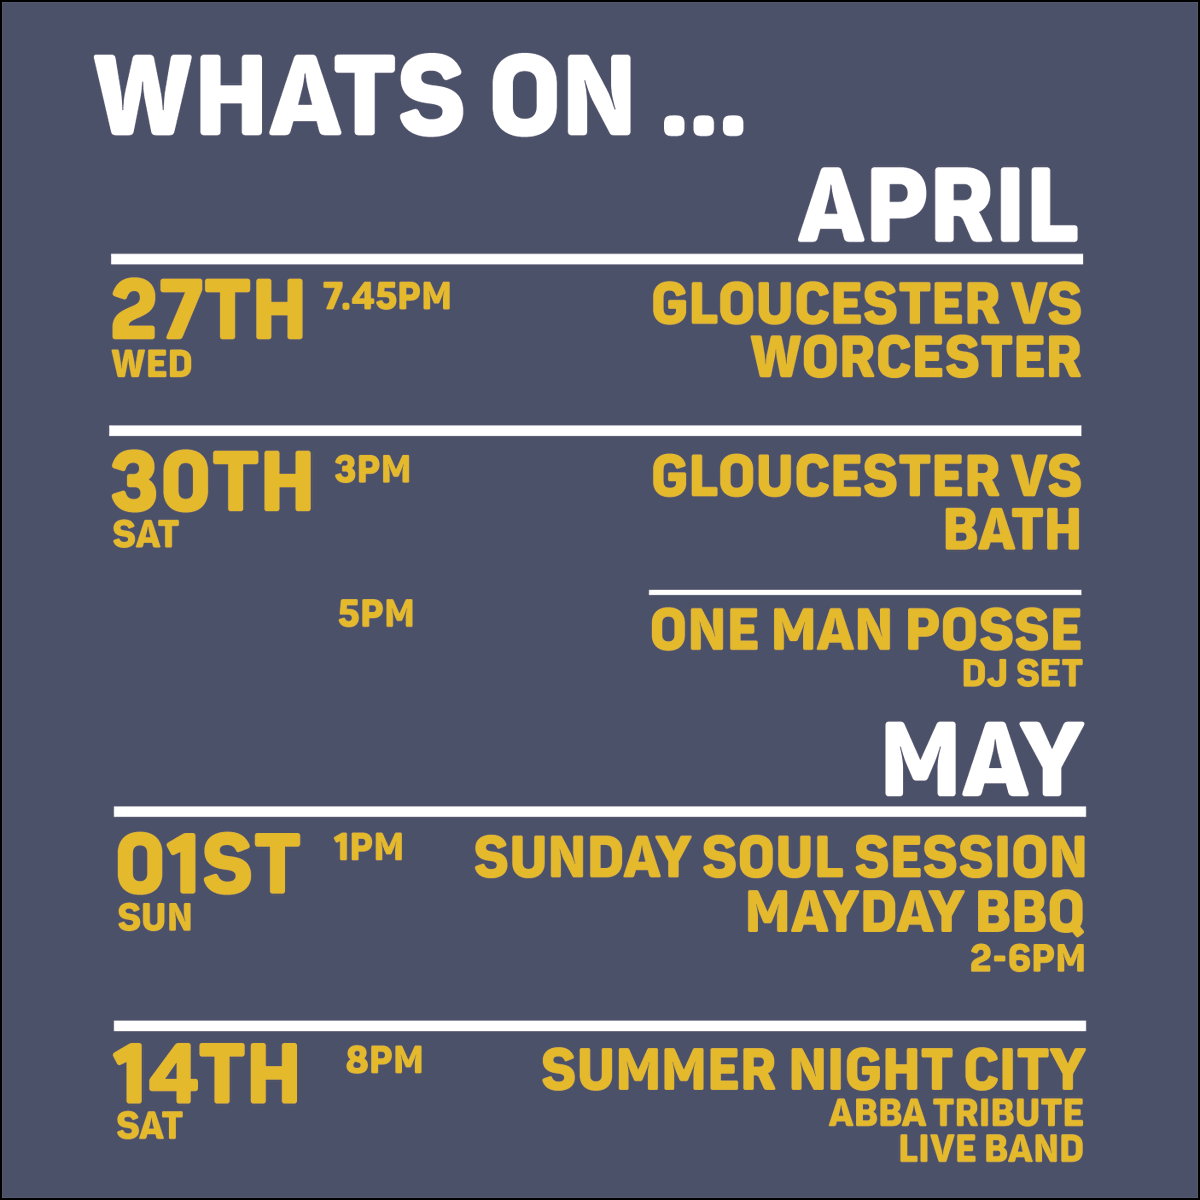 Update on the events we have on this month! 

#GloucesterEvents